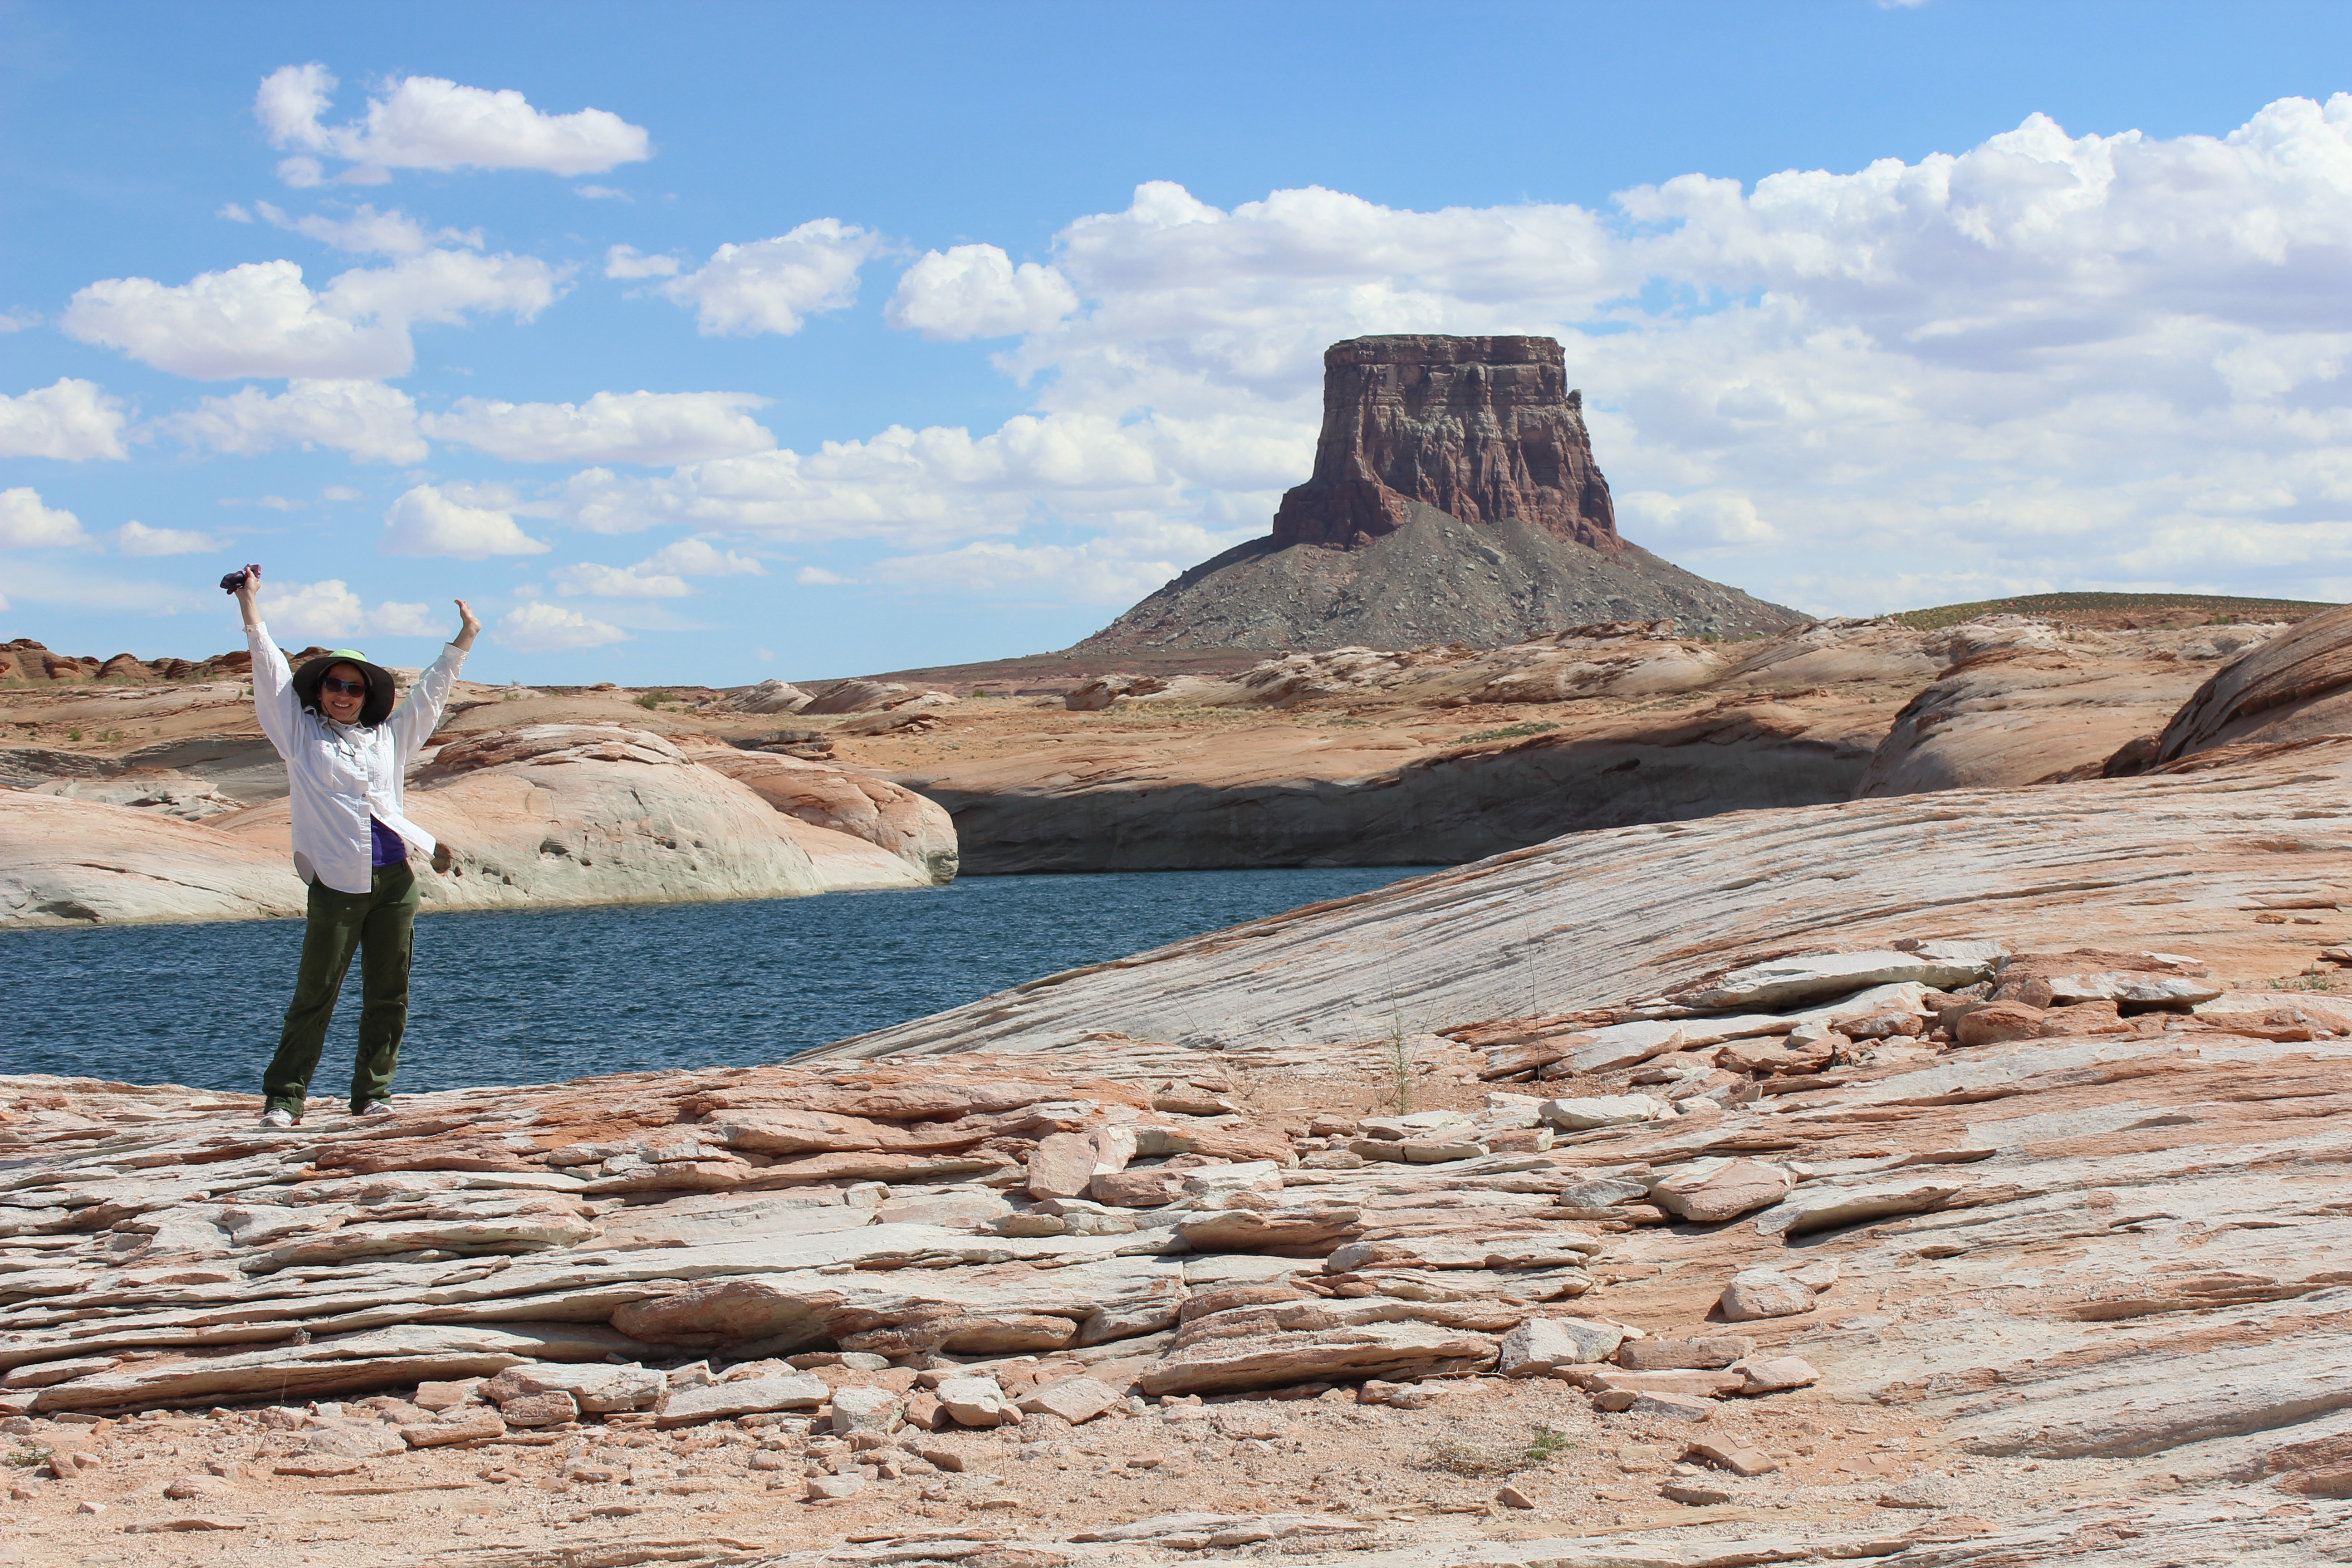 Woman raises her arms while standing in front of a sandstone butte